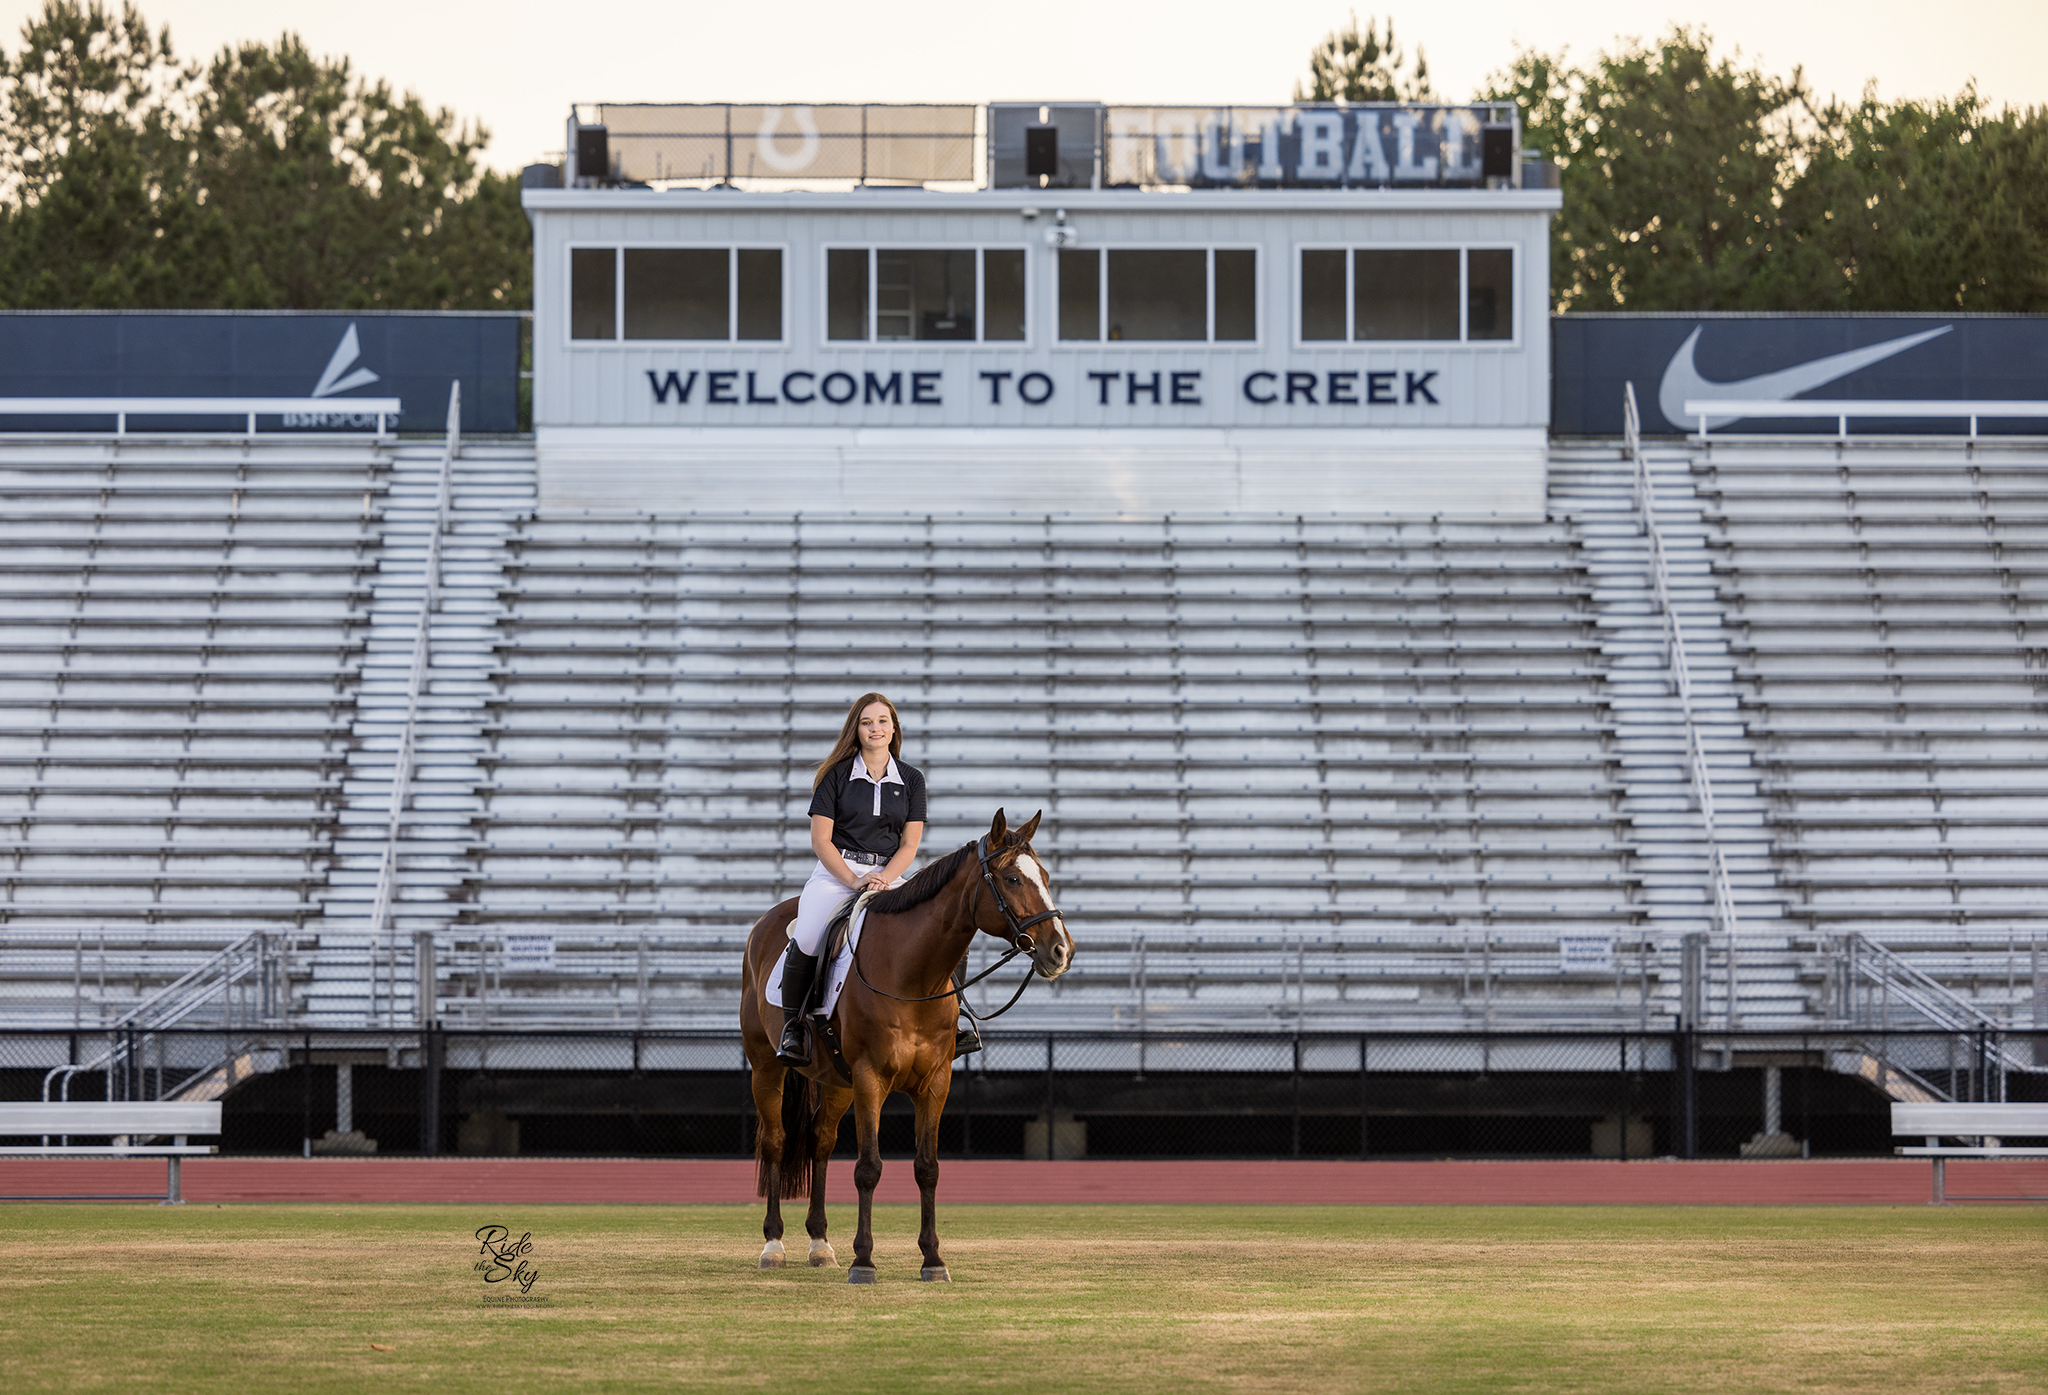 High School Senior on Football Field with her Horse for Senior Pictures